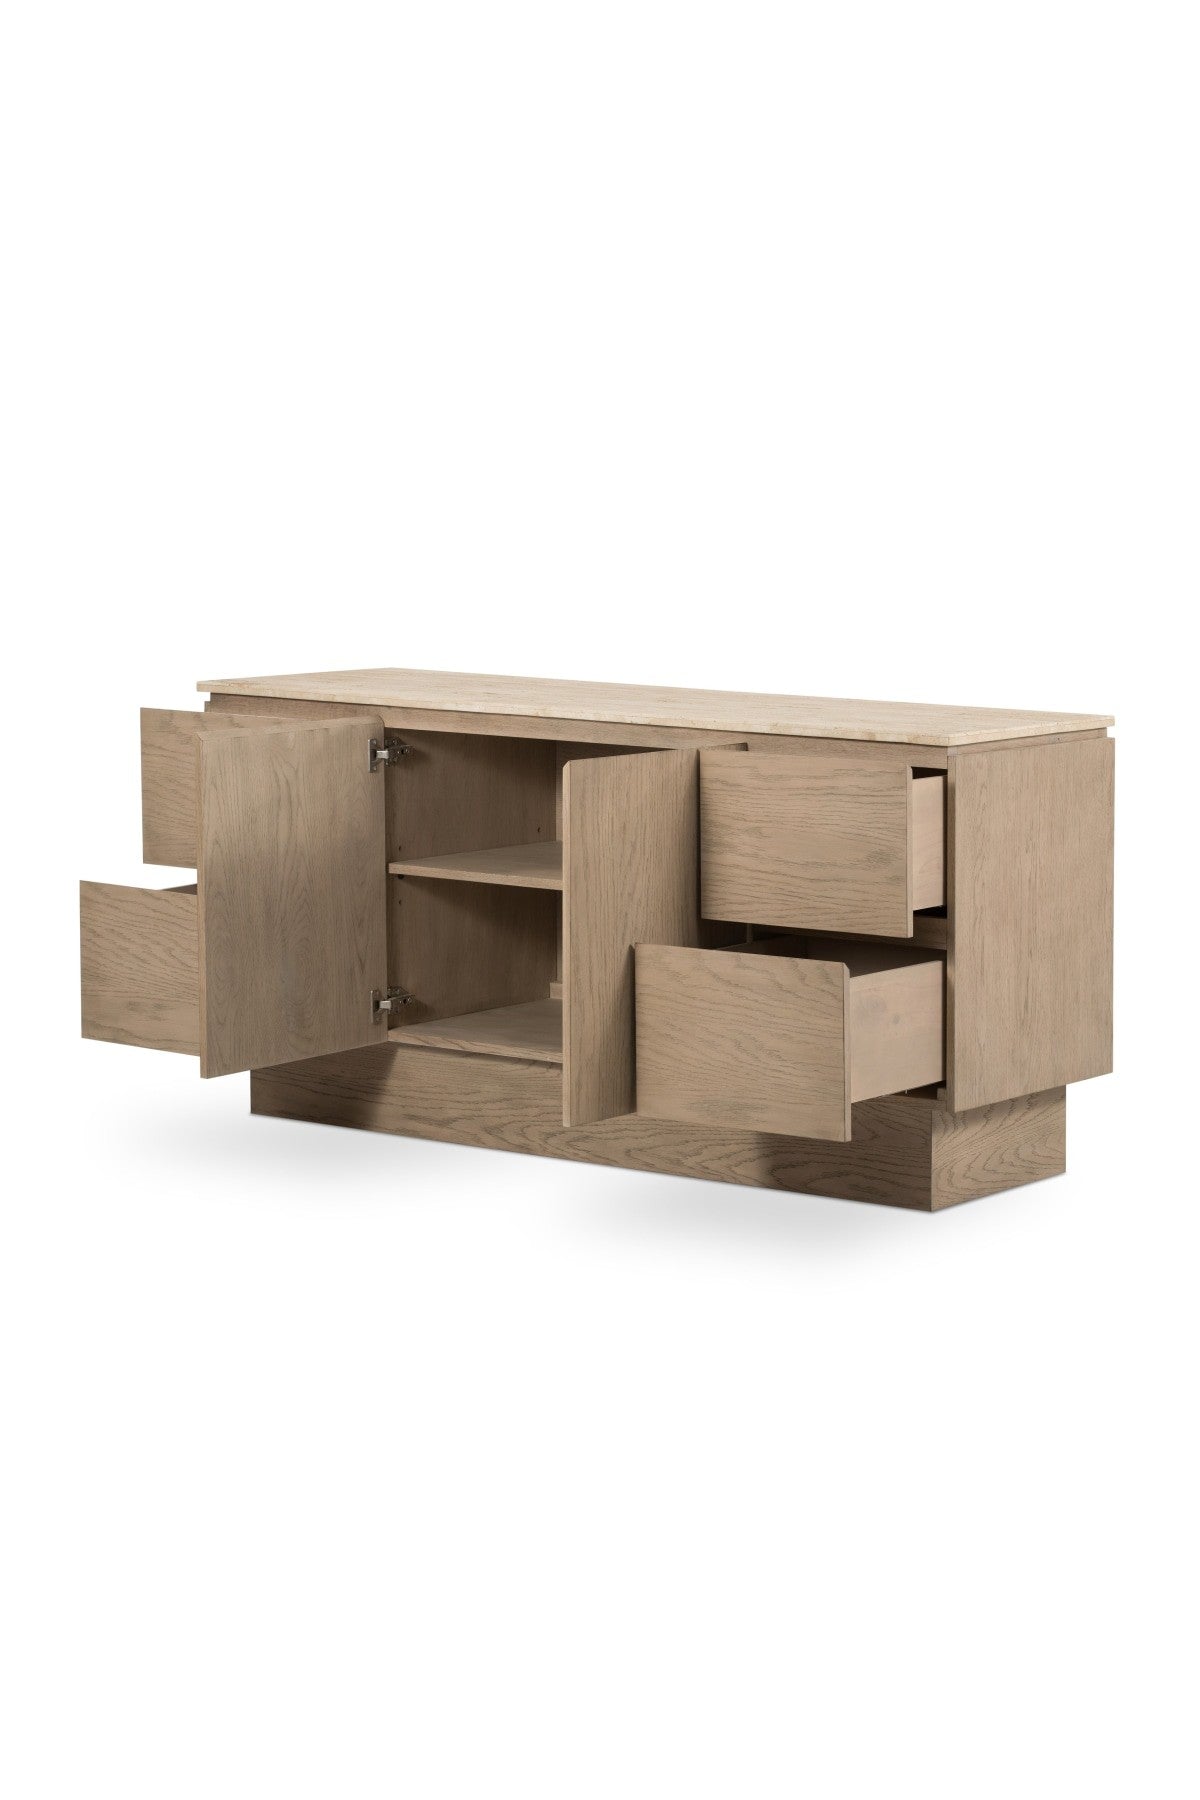 Paxe Sideboard